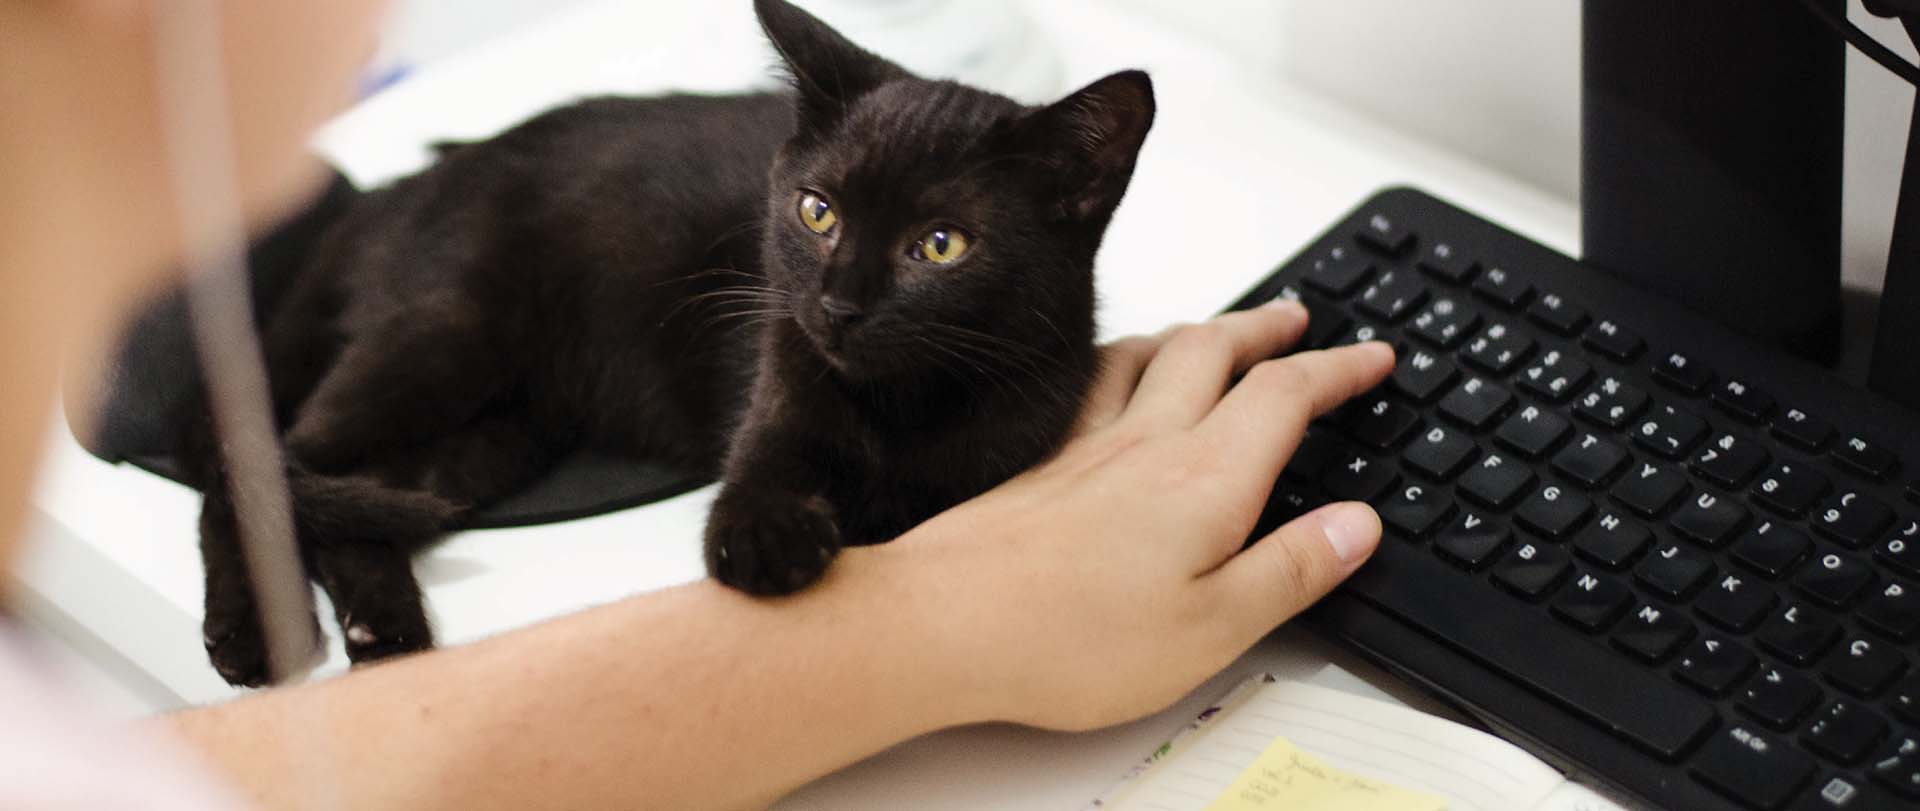 Pet laying on a keyboard with a student